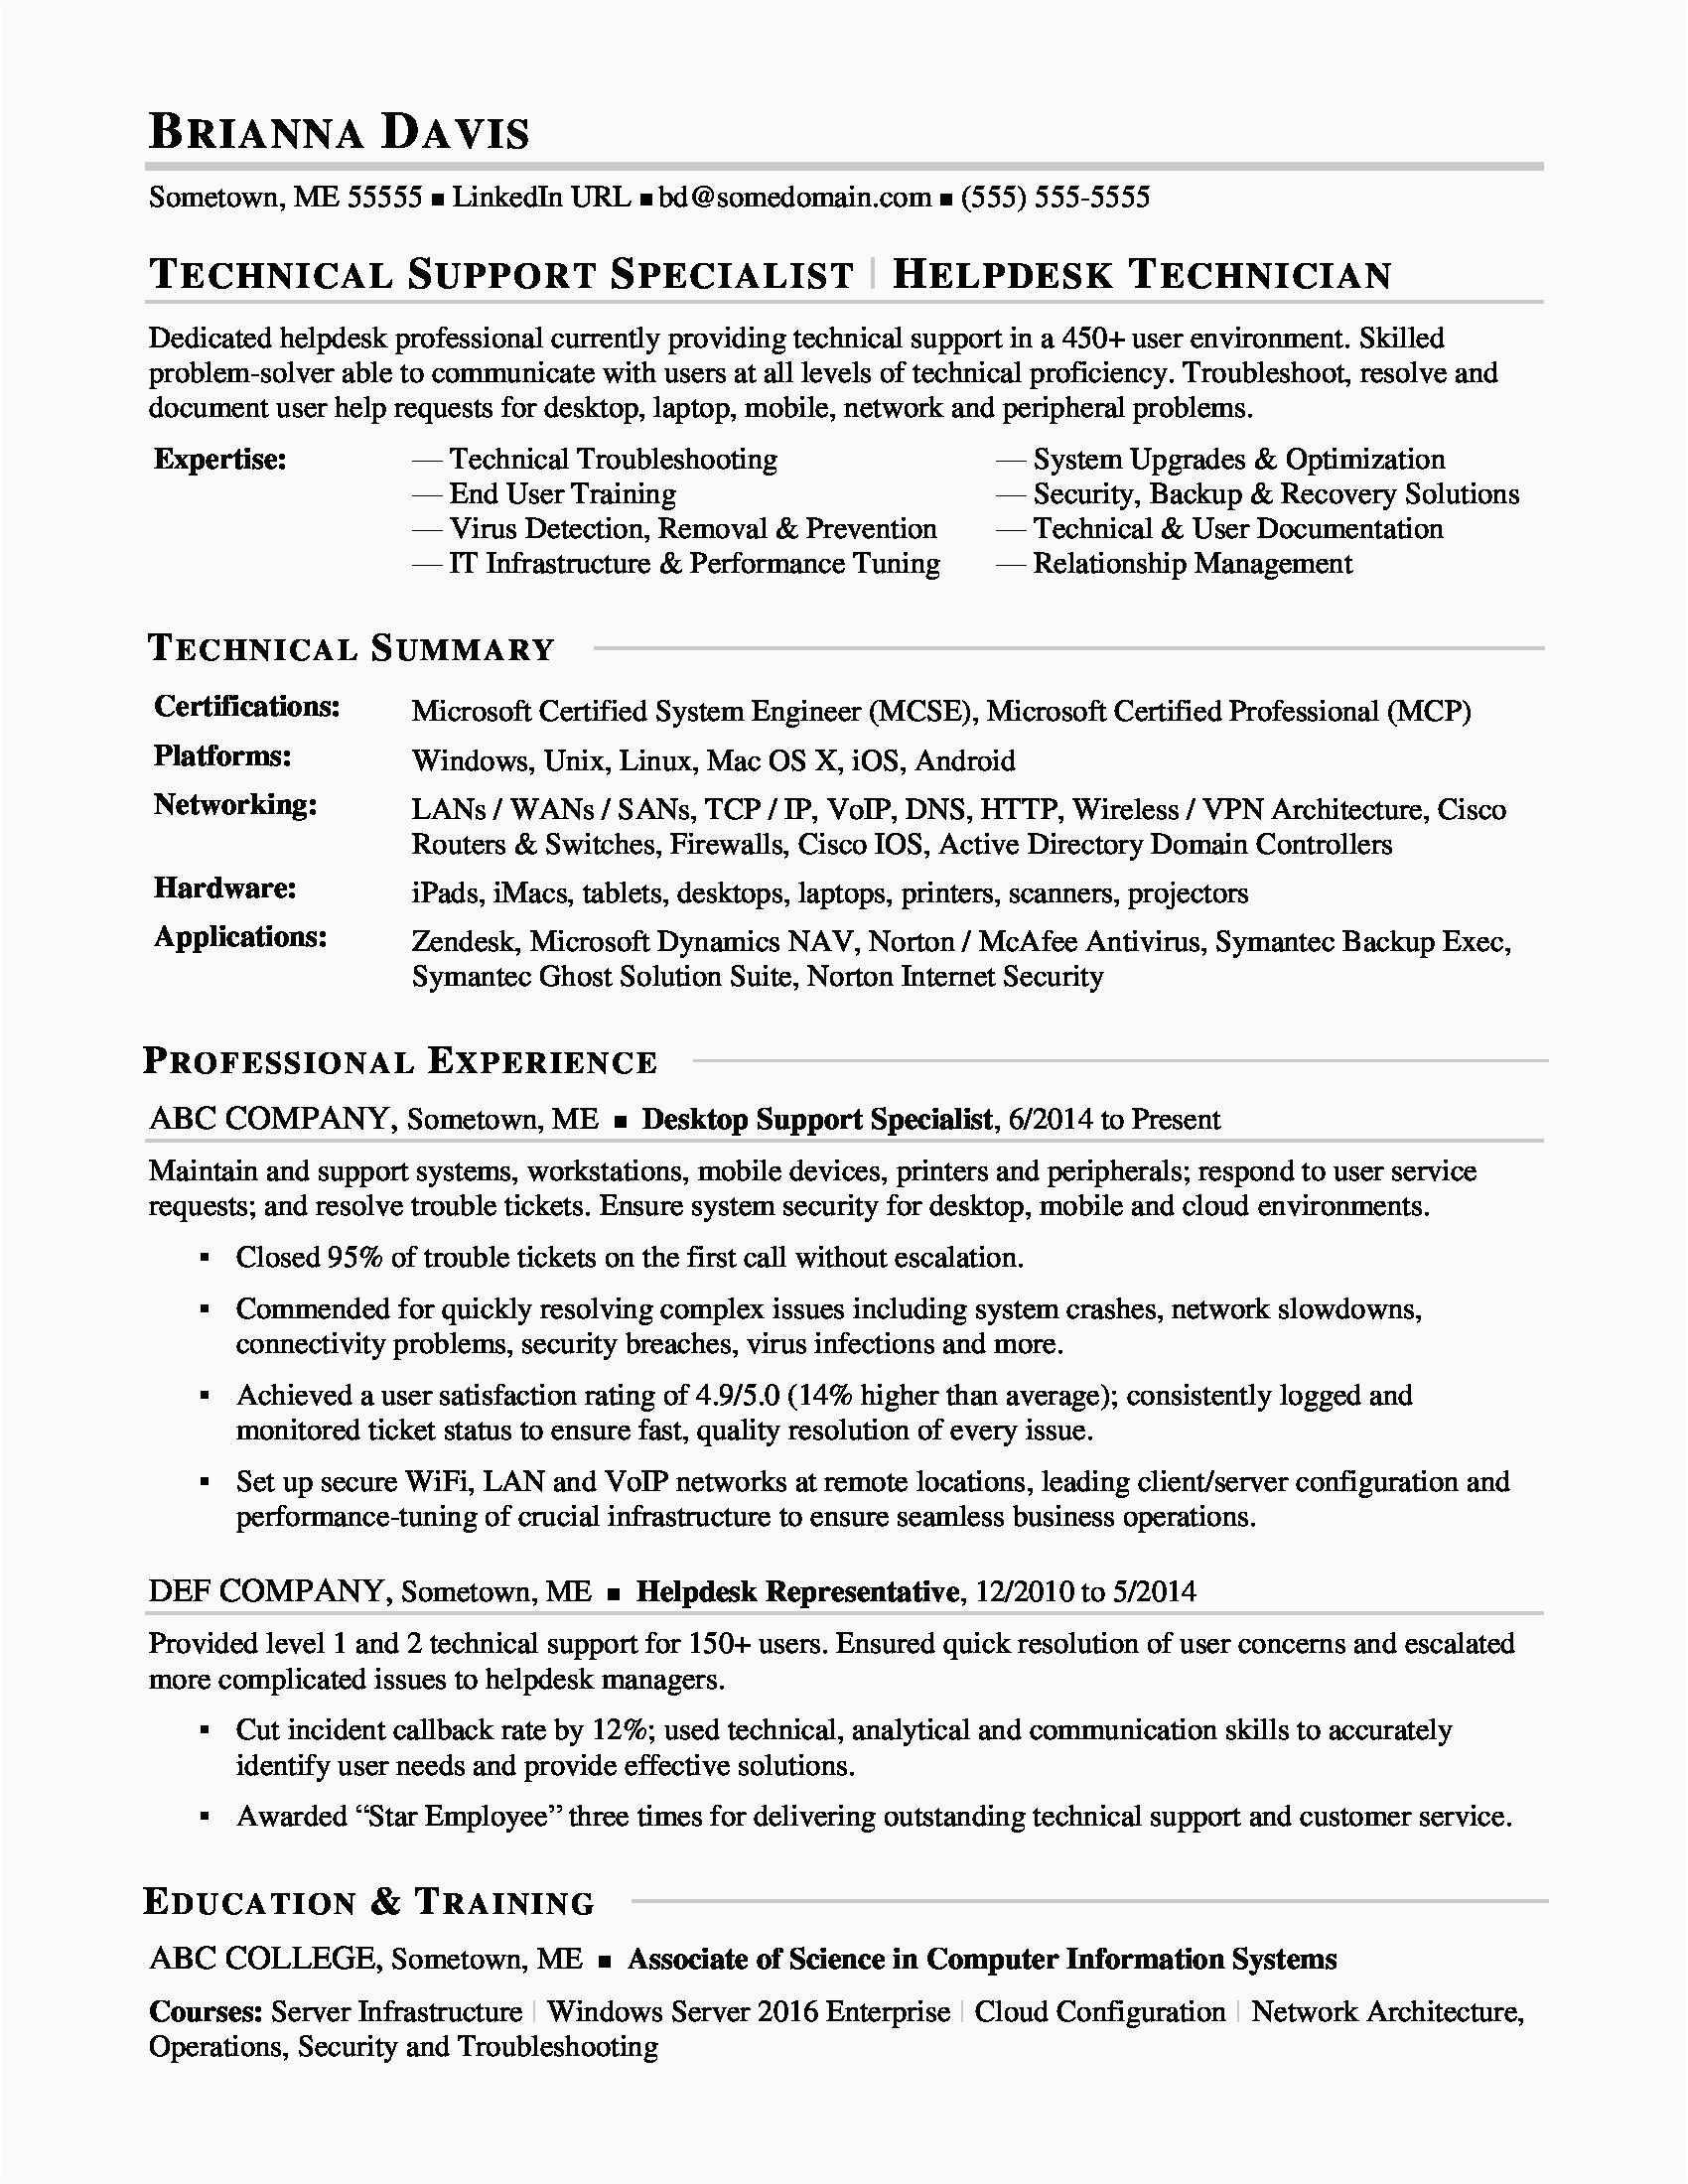 Technical Service Desk Support Sample Resume Sample Resume for Experienced It Help Desk Employee